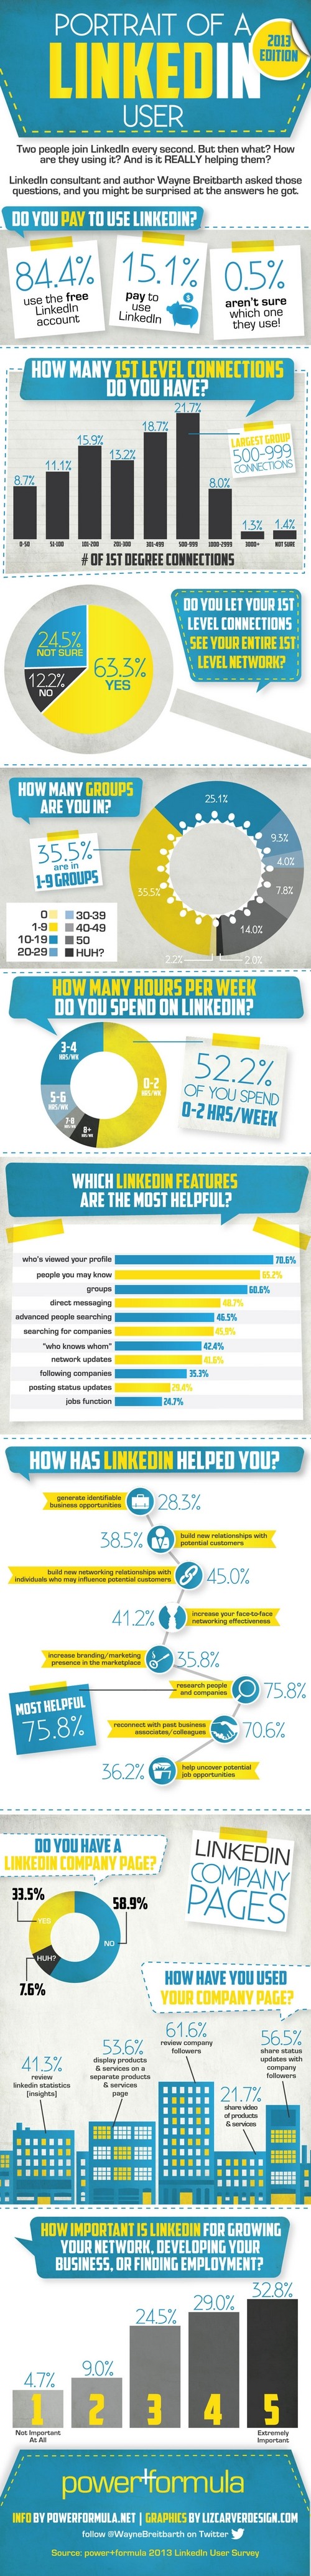 Infographic-portrait of a linkedin user